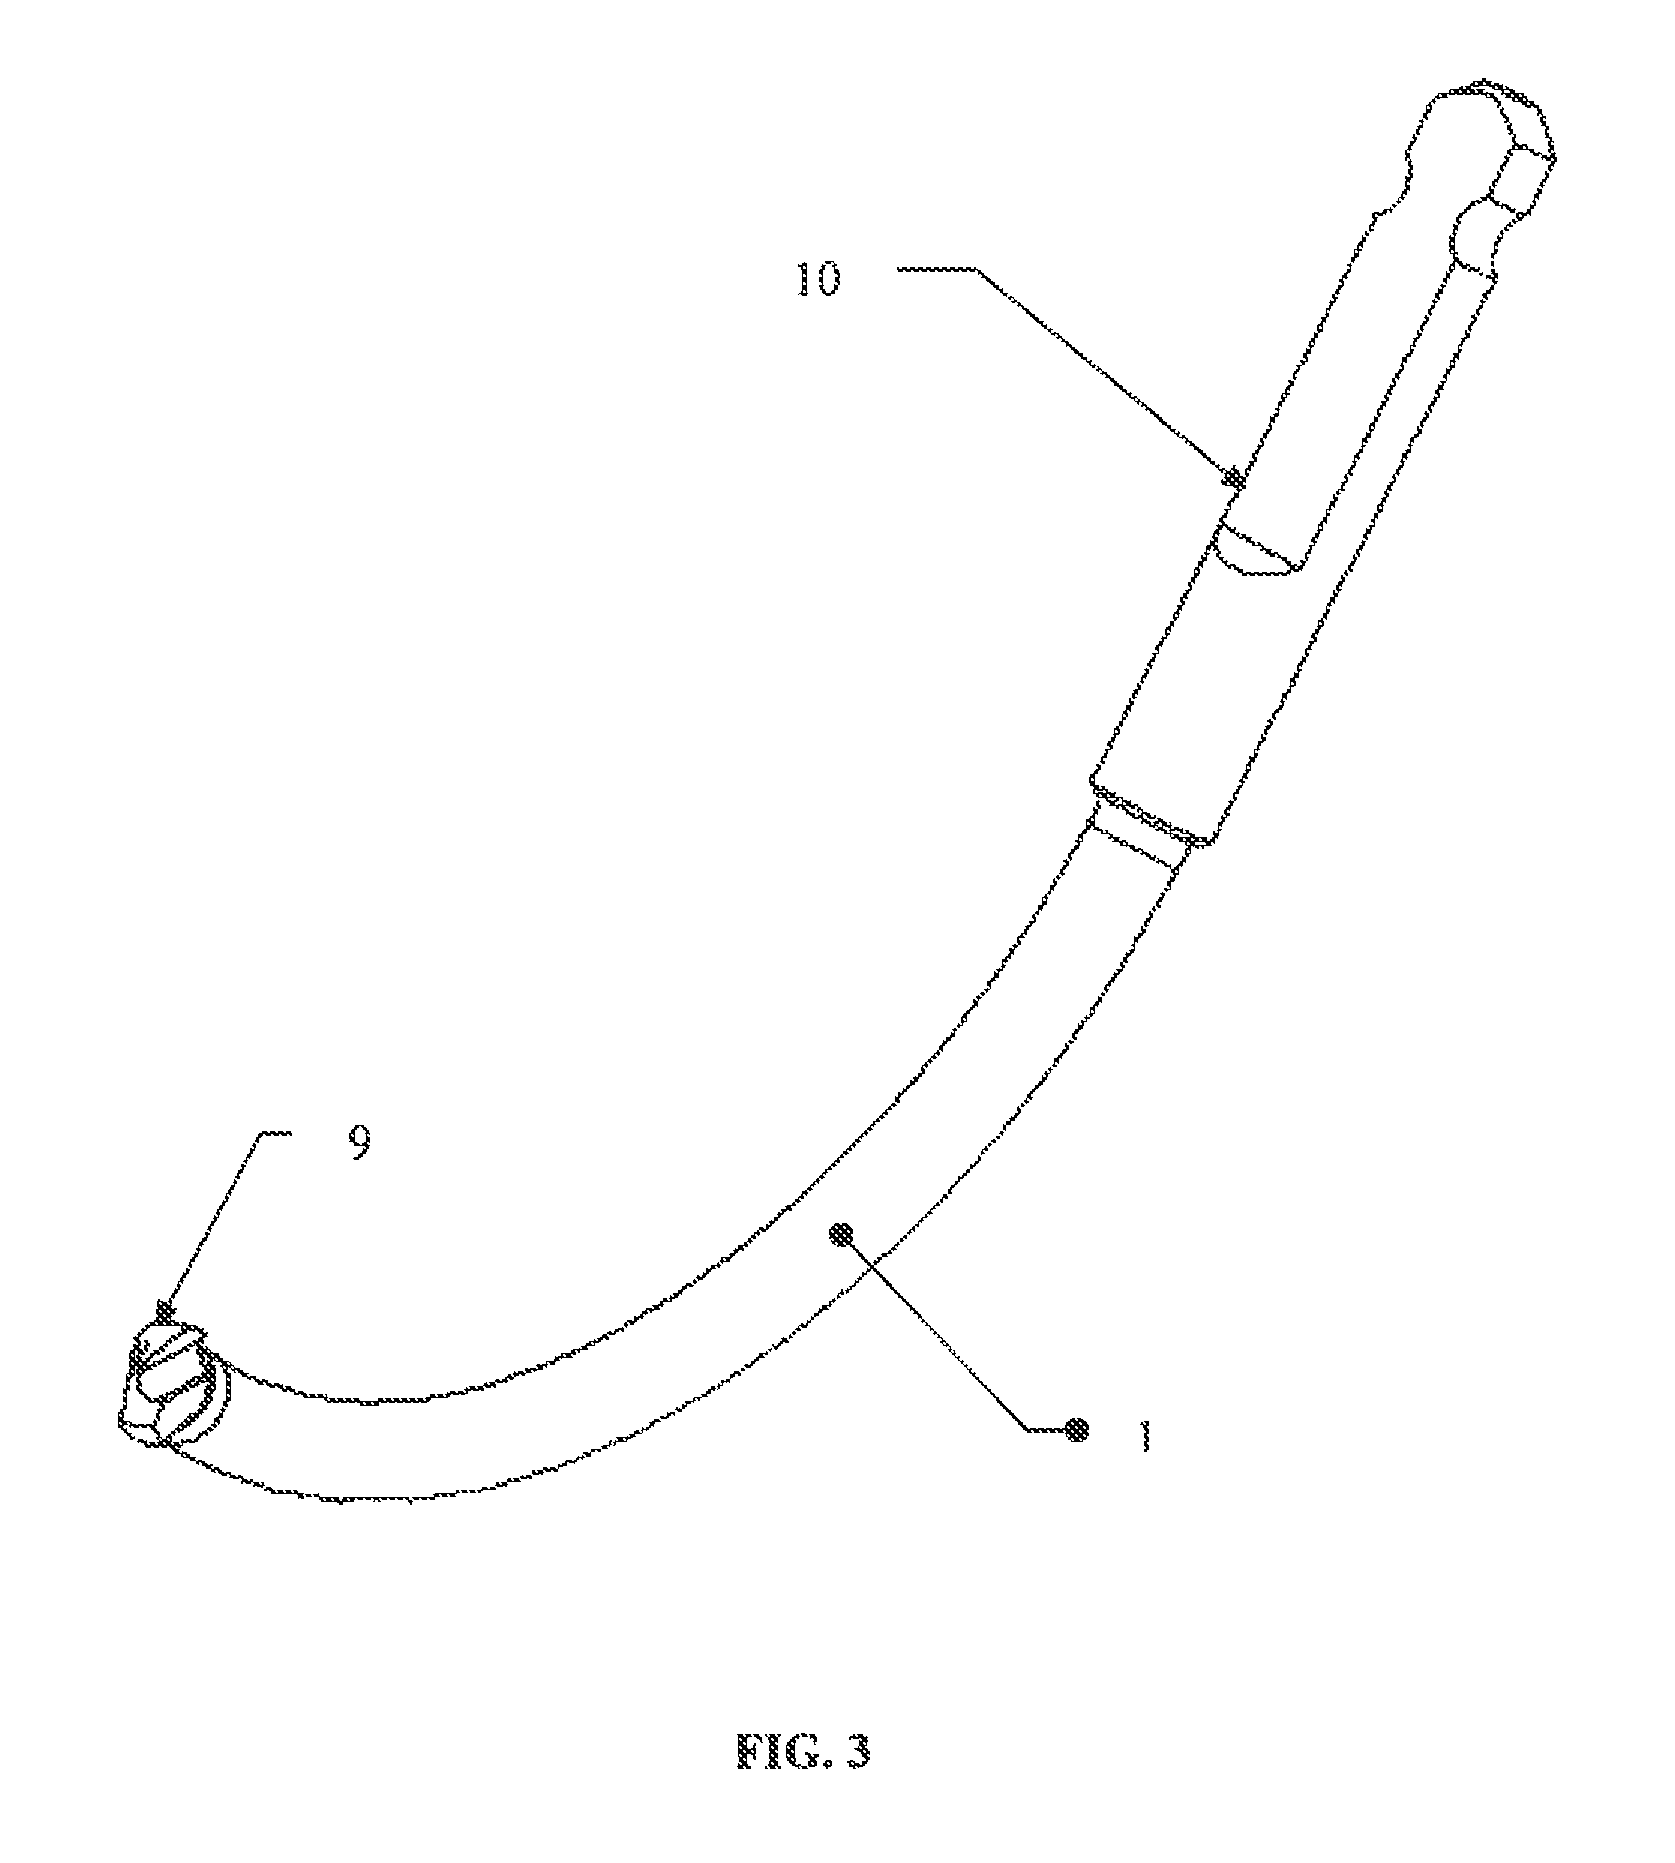 Curved assembly for reattachment of fragmented bone segments